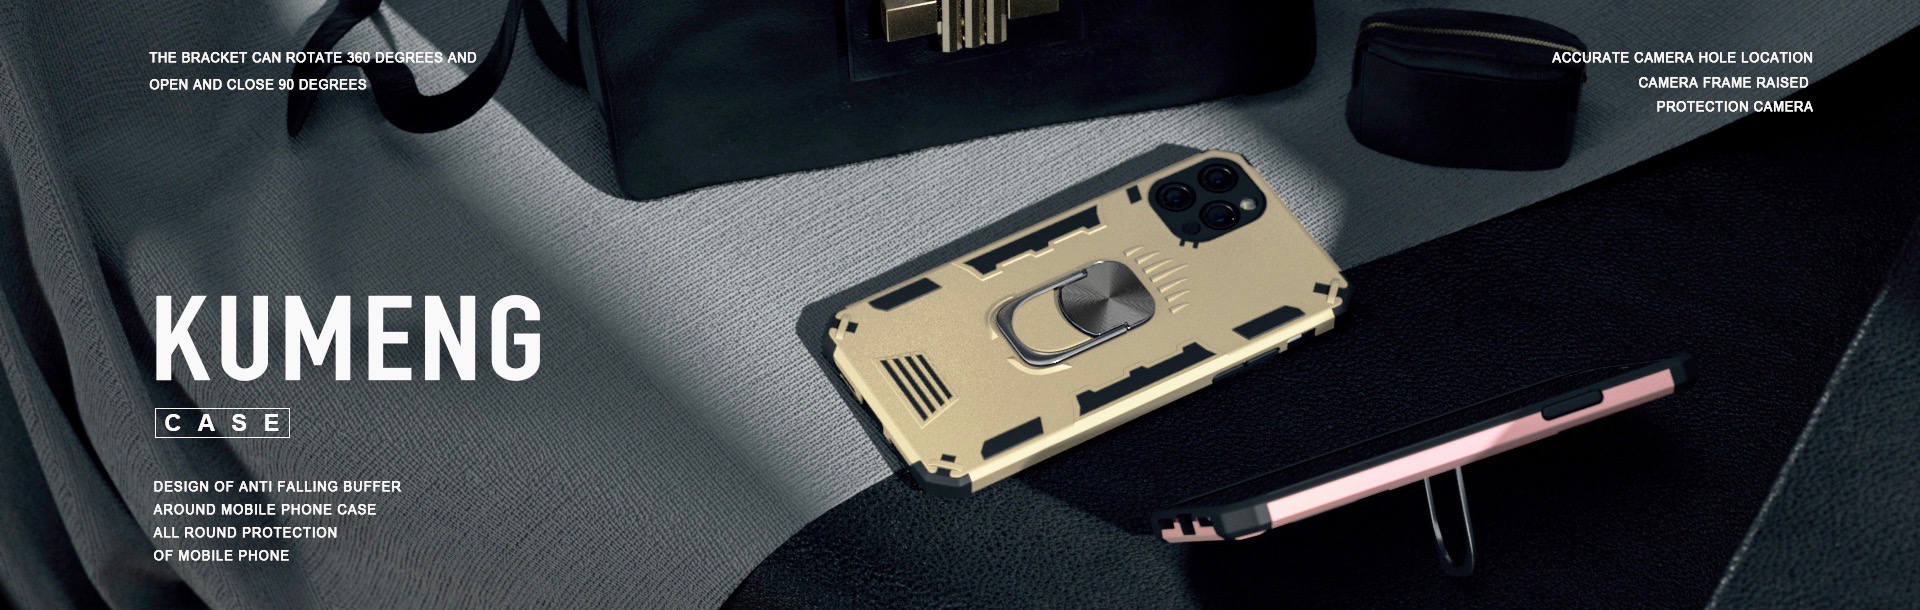 A 2-in-1 phone case in metallic color